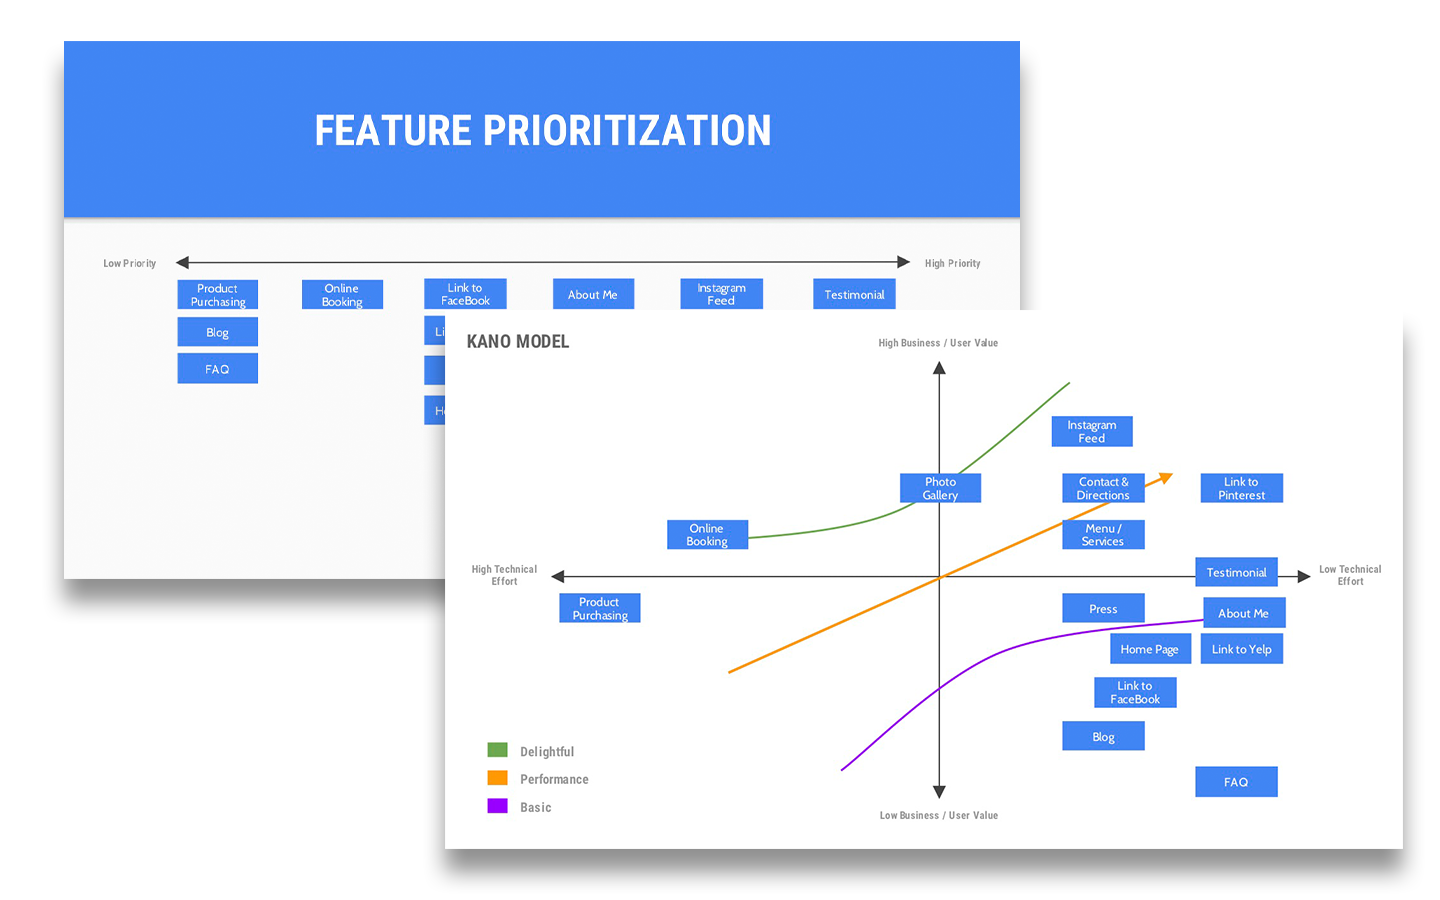 The feature prioritization diagrams that I created for this project